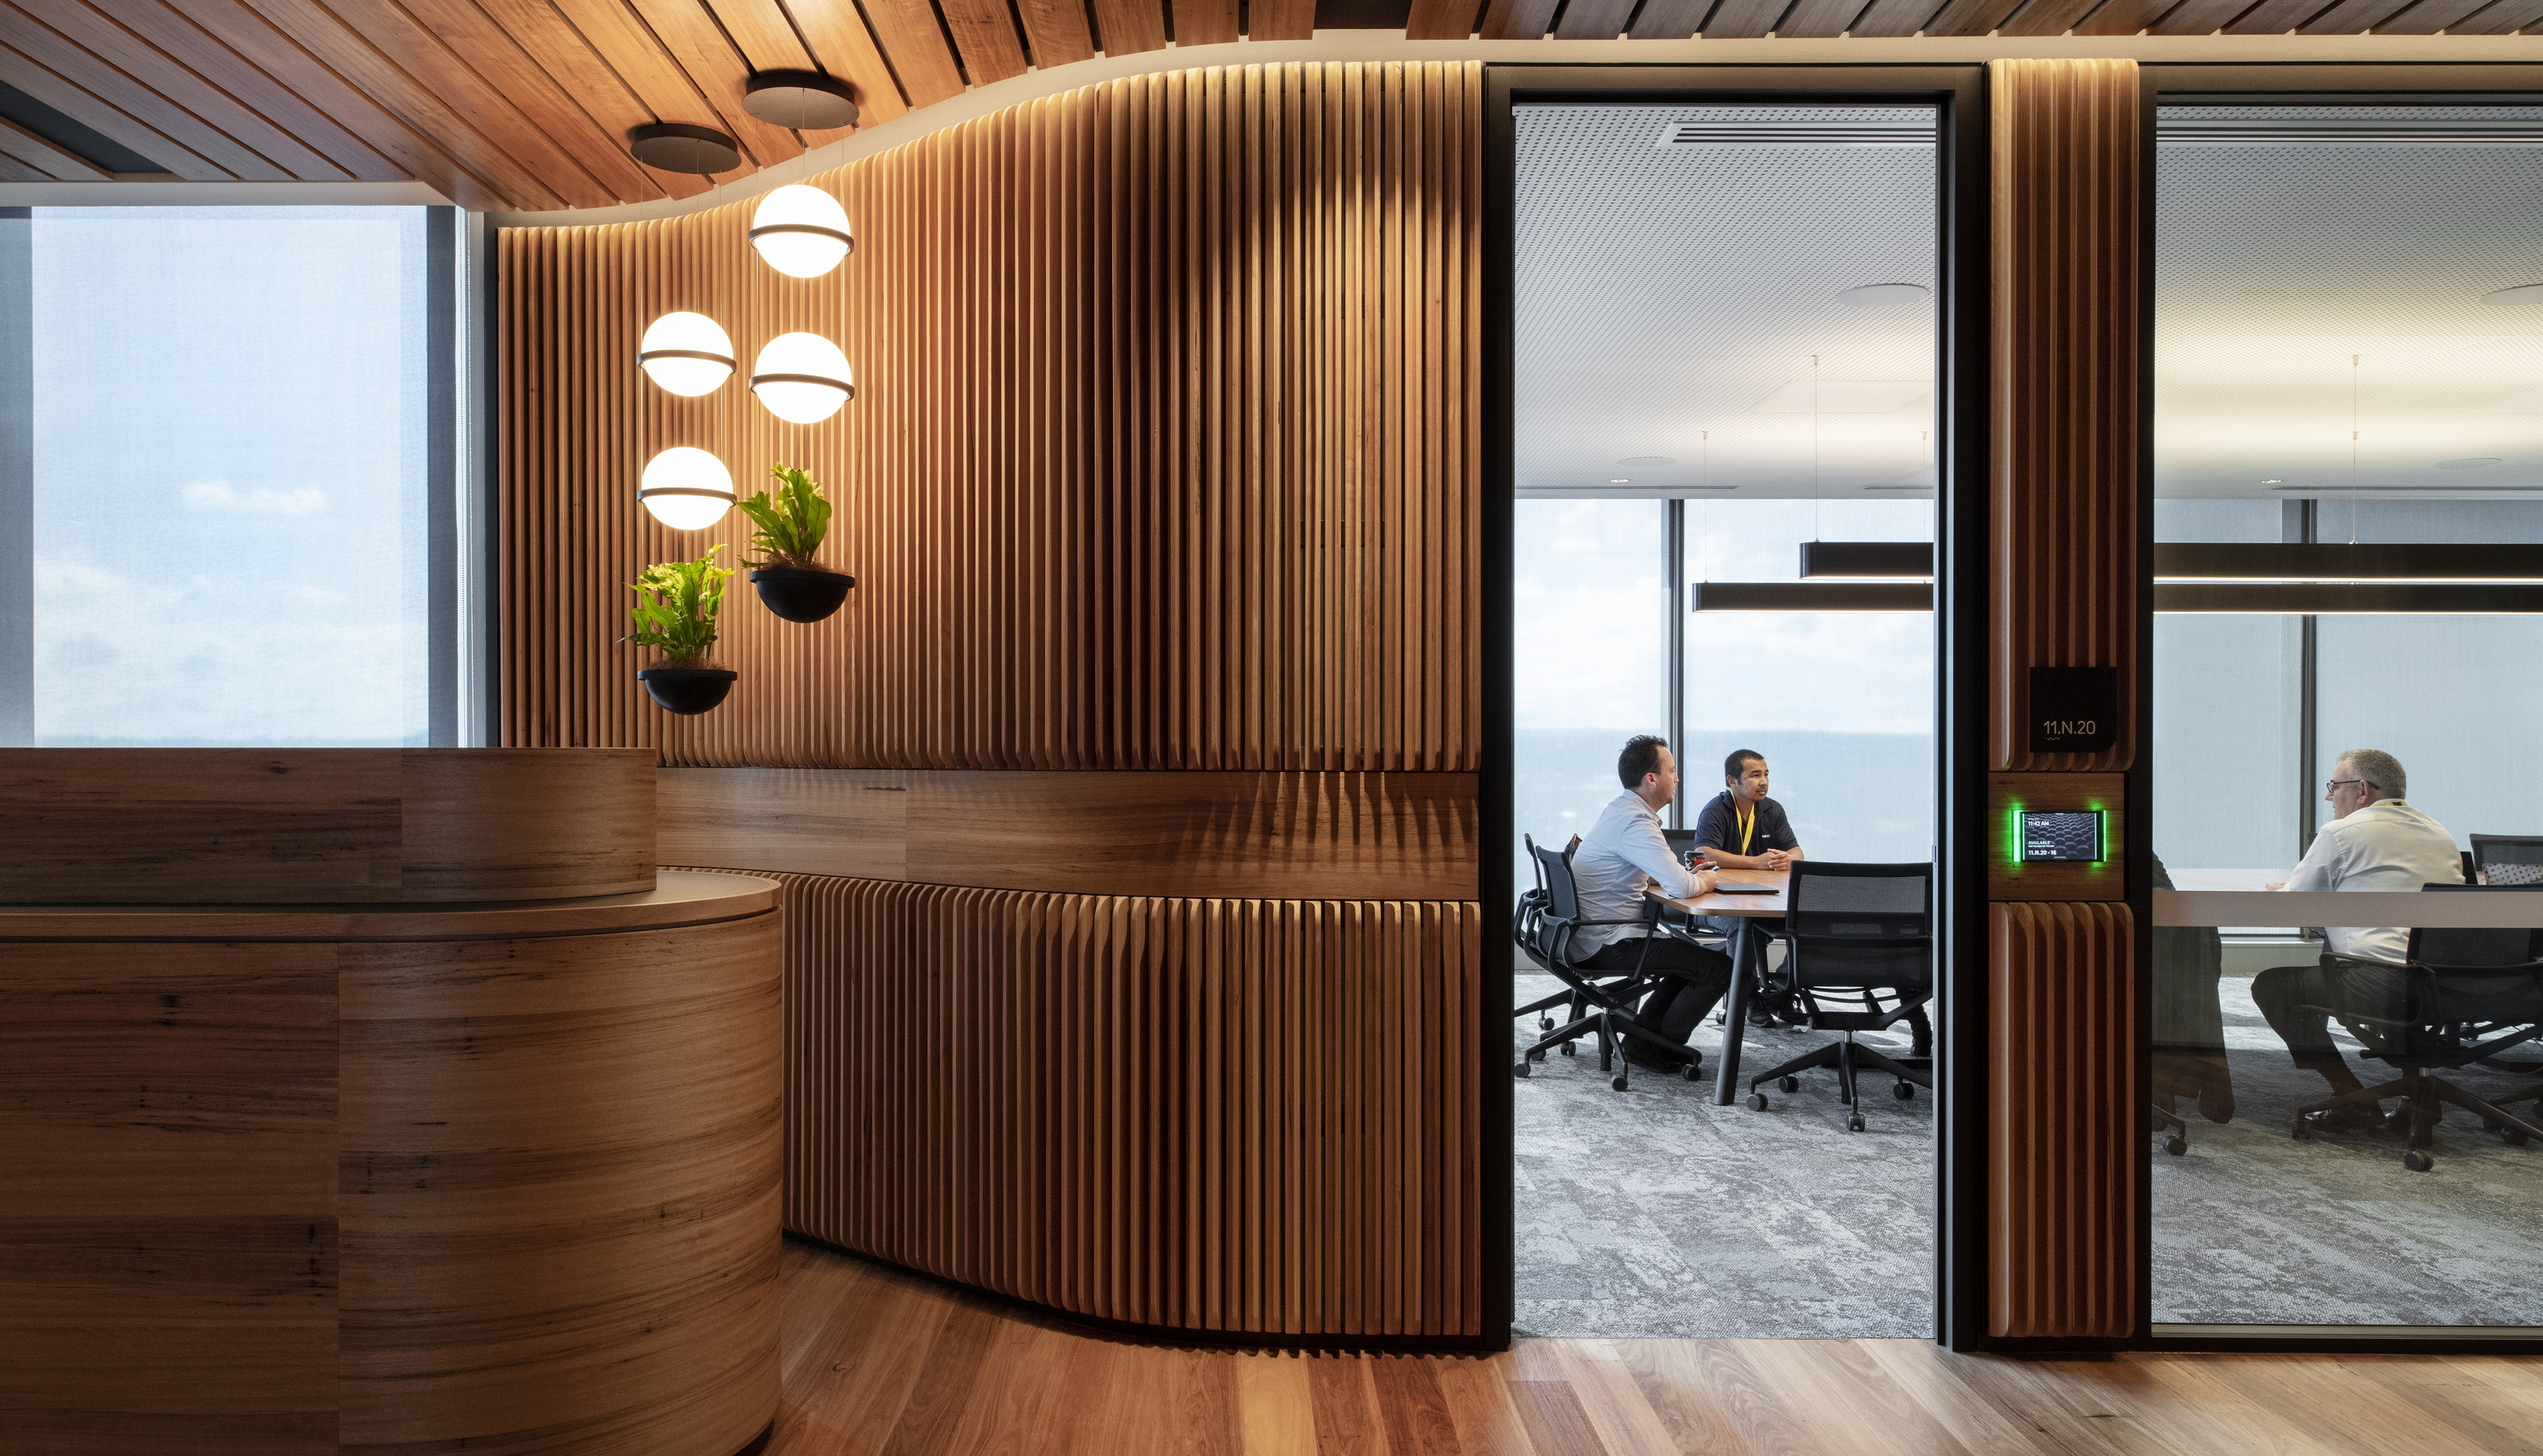 The "Office Revolution" continues with Property NSW's new workspace